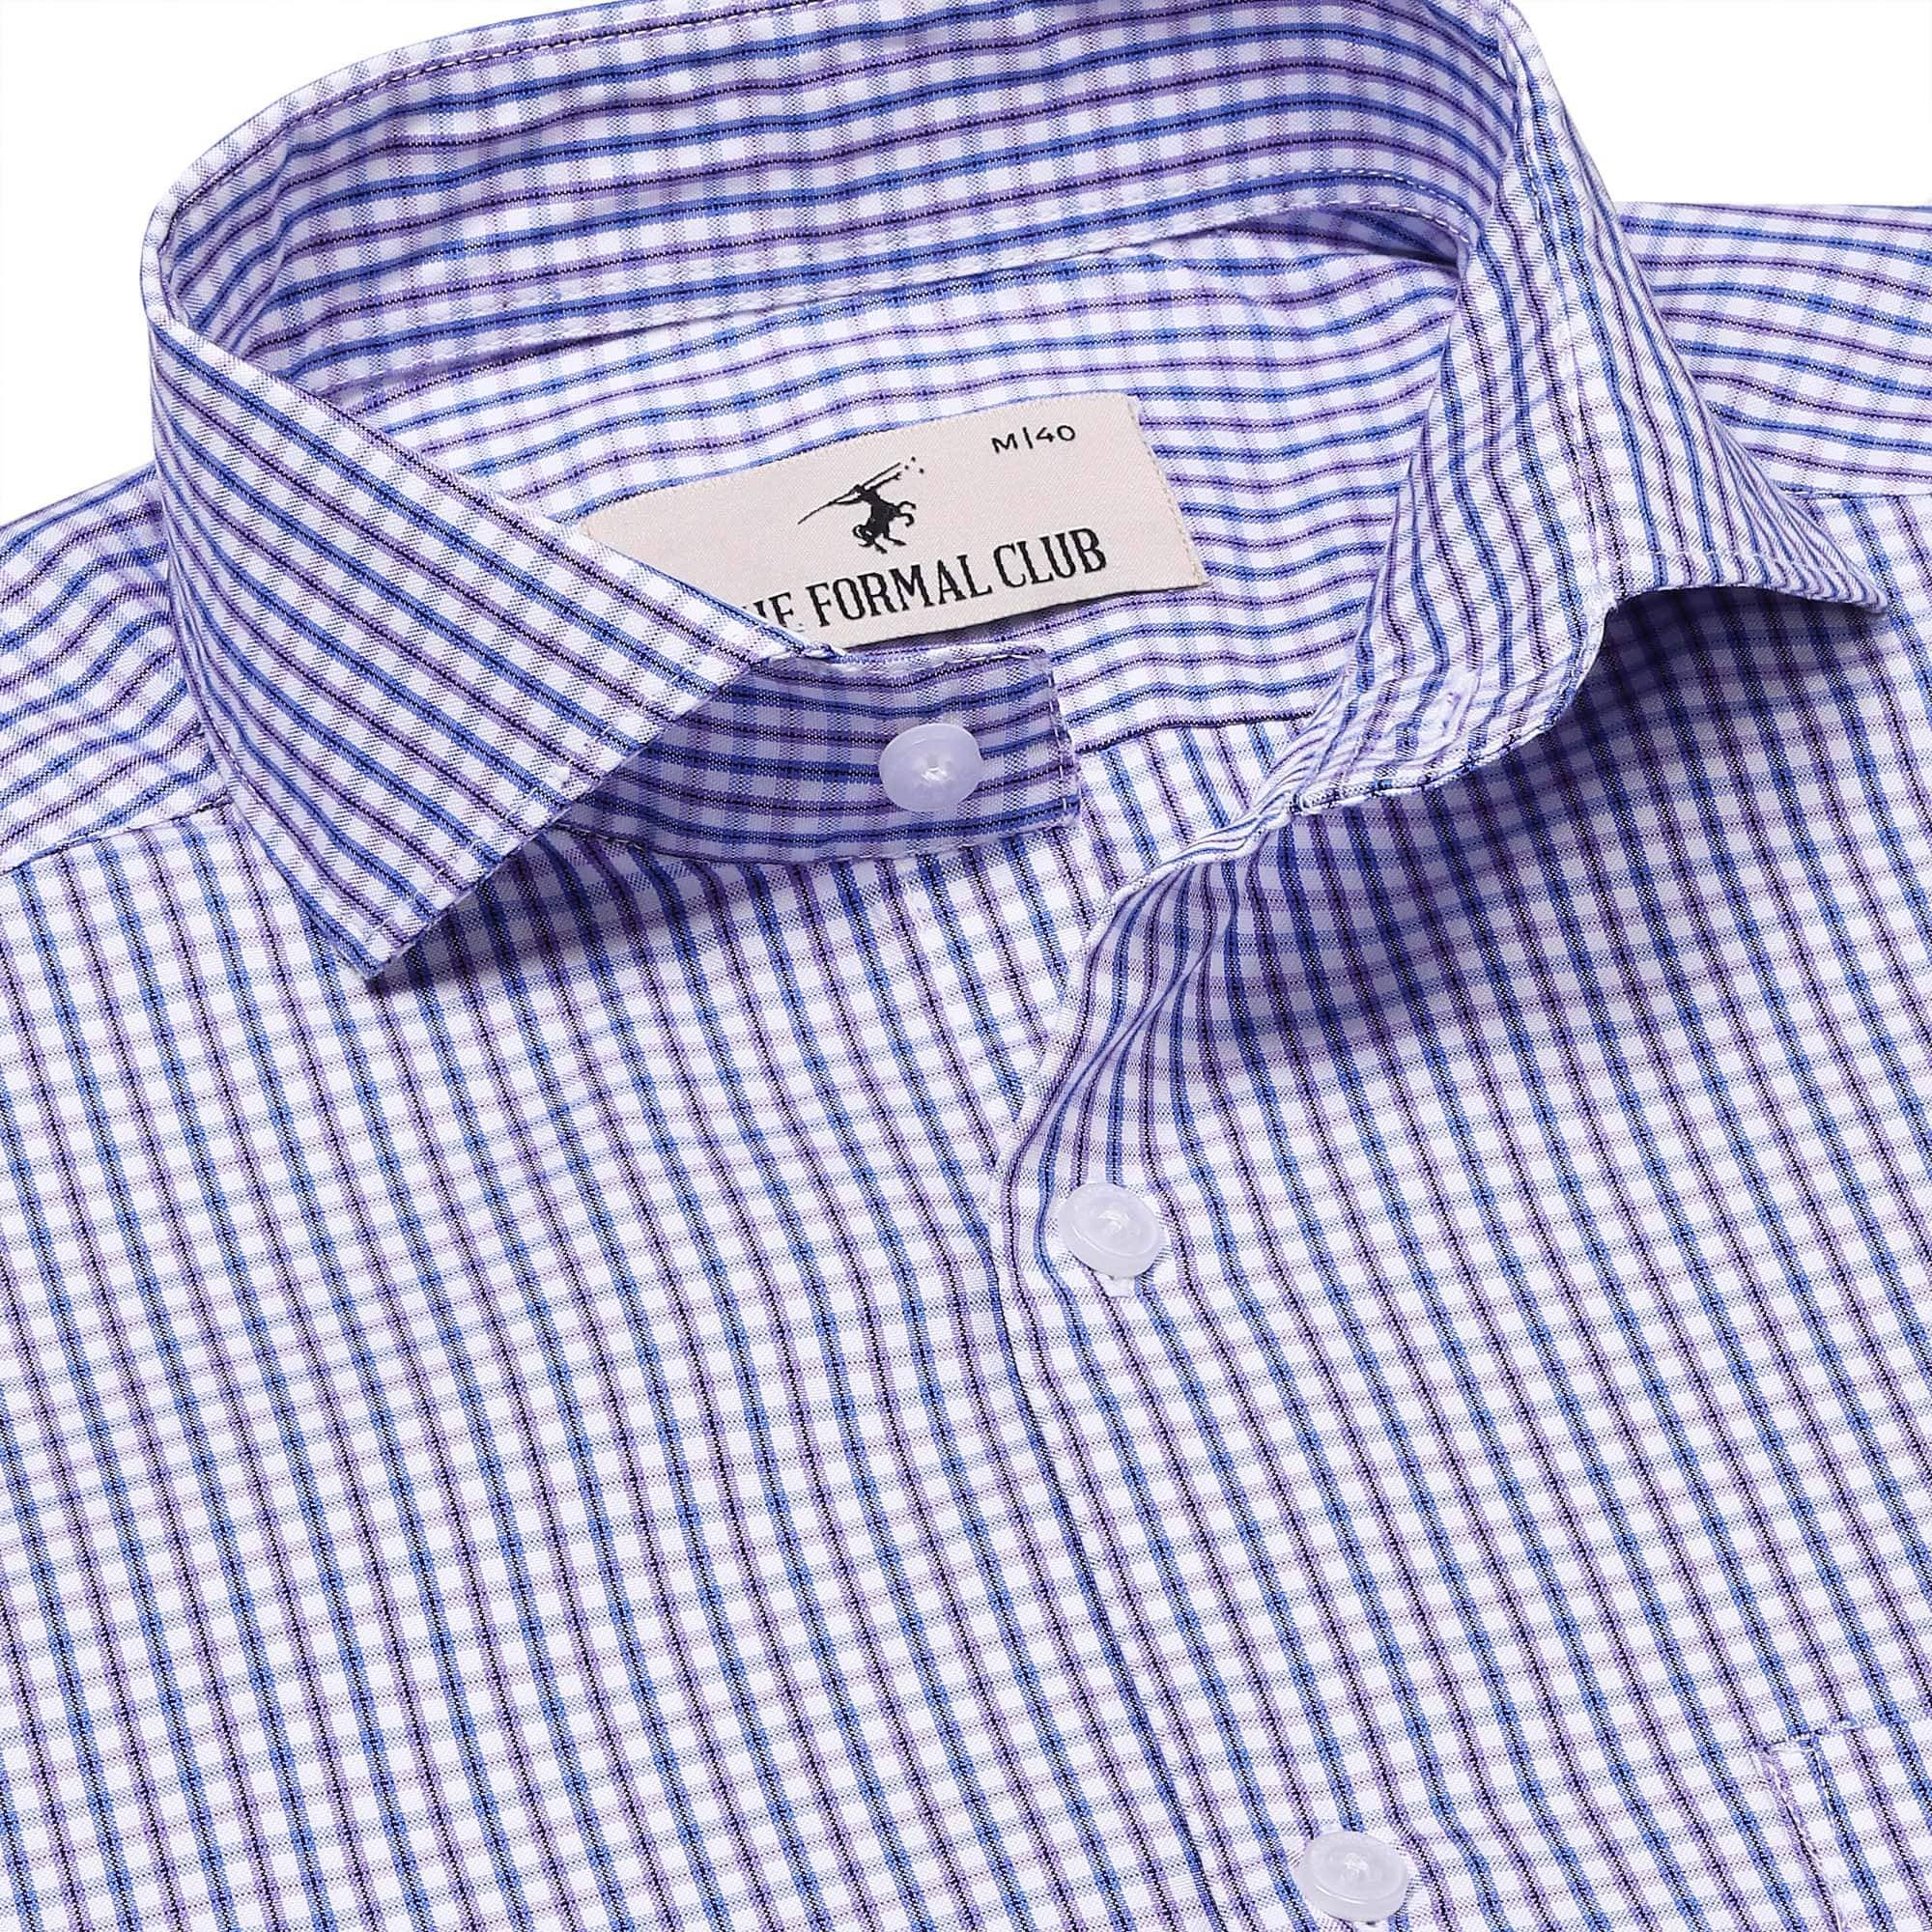 Zephyr Check Shirt In Blue And Mauve Slim Fit